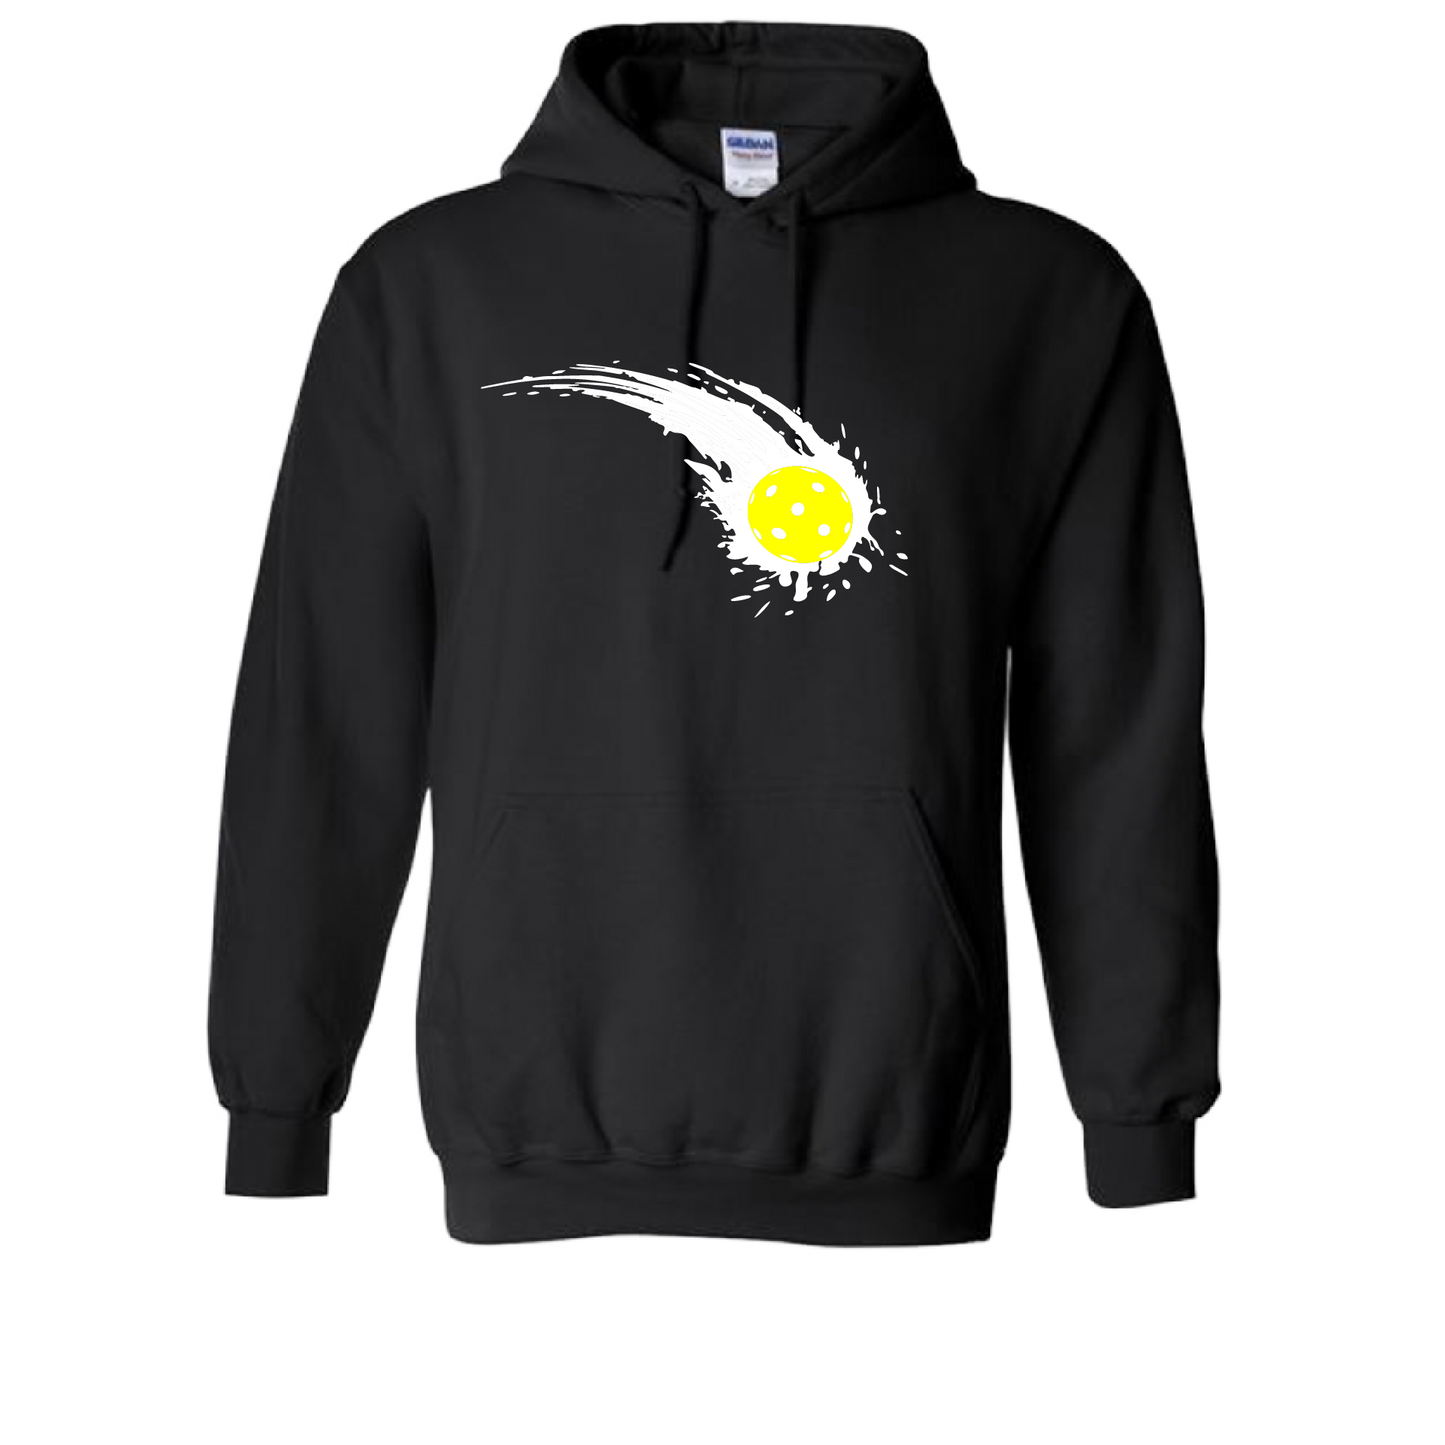 Pickleball Design: Impact  Unisex Hooded Sweatshirt: Moisture-wicking, double-lined hood, front pouch pocket.  This unisex hooded sweatshirt is ultra comfortable and soft. Stay warm on the Pickleball courts while being that hit with this one of kind design.